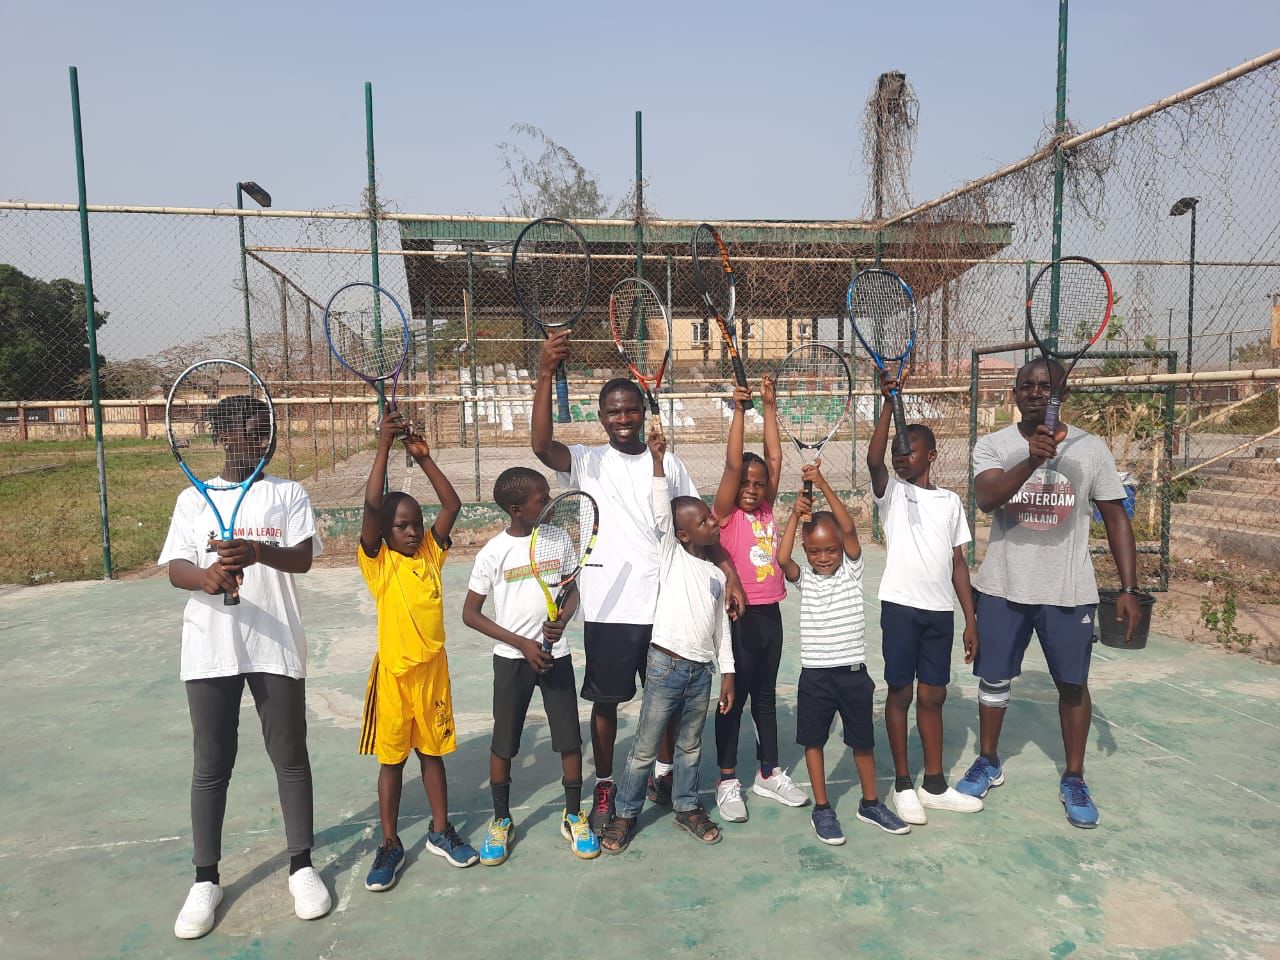 Epe Tennis Club Serves Up Tennis Renaissance, Aims to Train 200+ Players by 2030 Amidst Challenges.